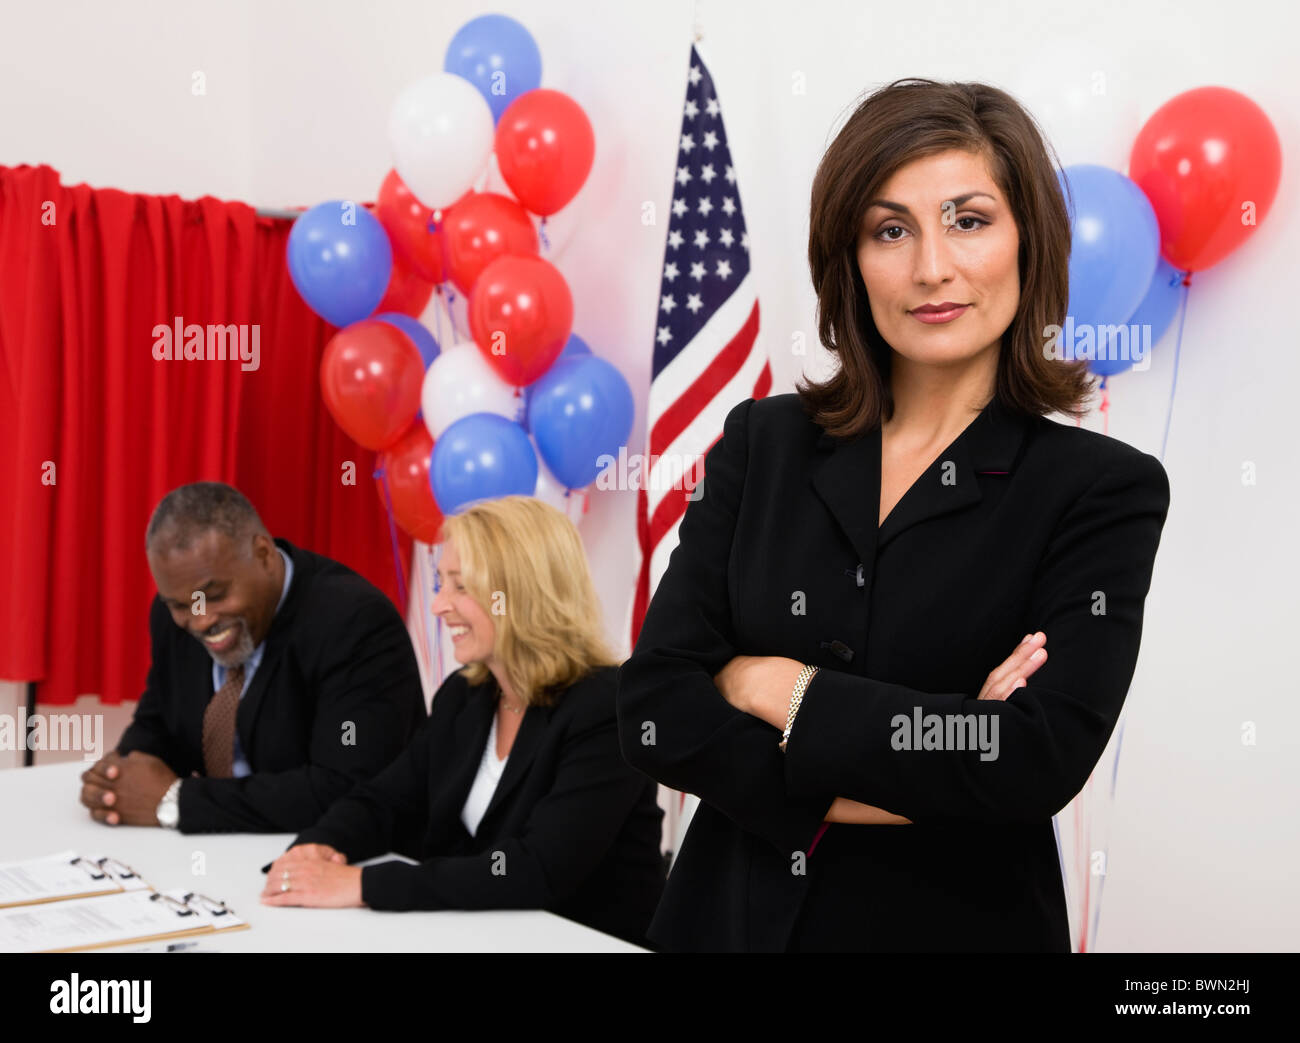 USA, Illinois, Metamora, Portrait of woman at polling place, US flag, balloons and voting booth in background Stock Photo